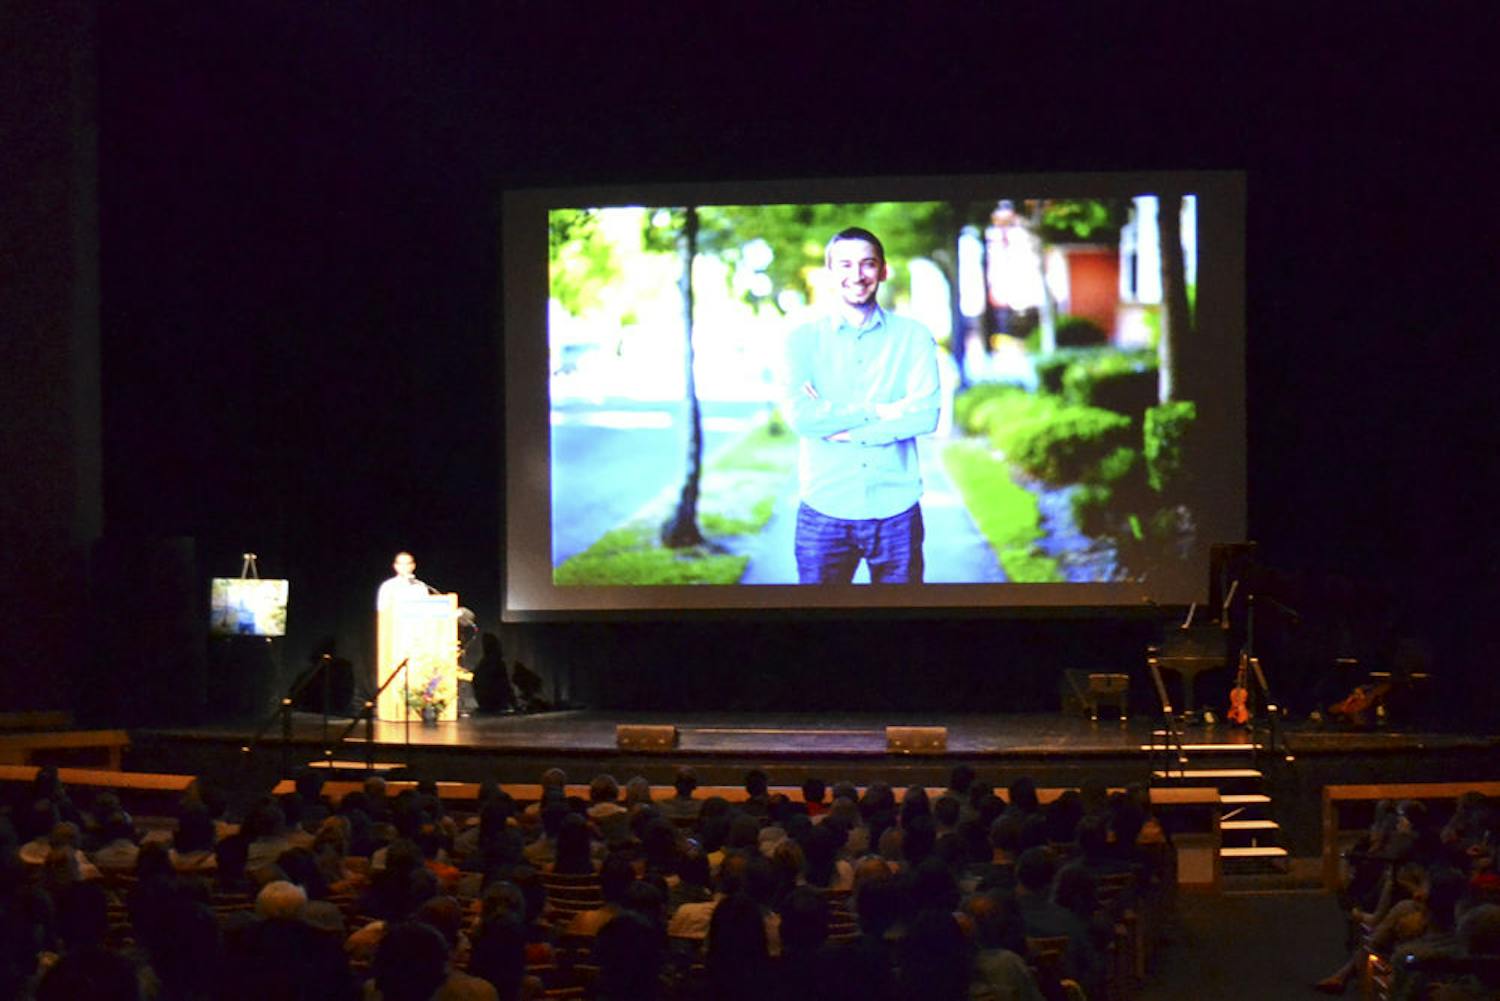 Sam Tarantino (left), co-founder of Grooveshark, a Gainesville-based music streaming service, speaks to family and friends of fellow co-founder Josh Greenberg, who was found dead on July 19.